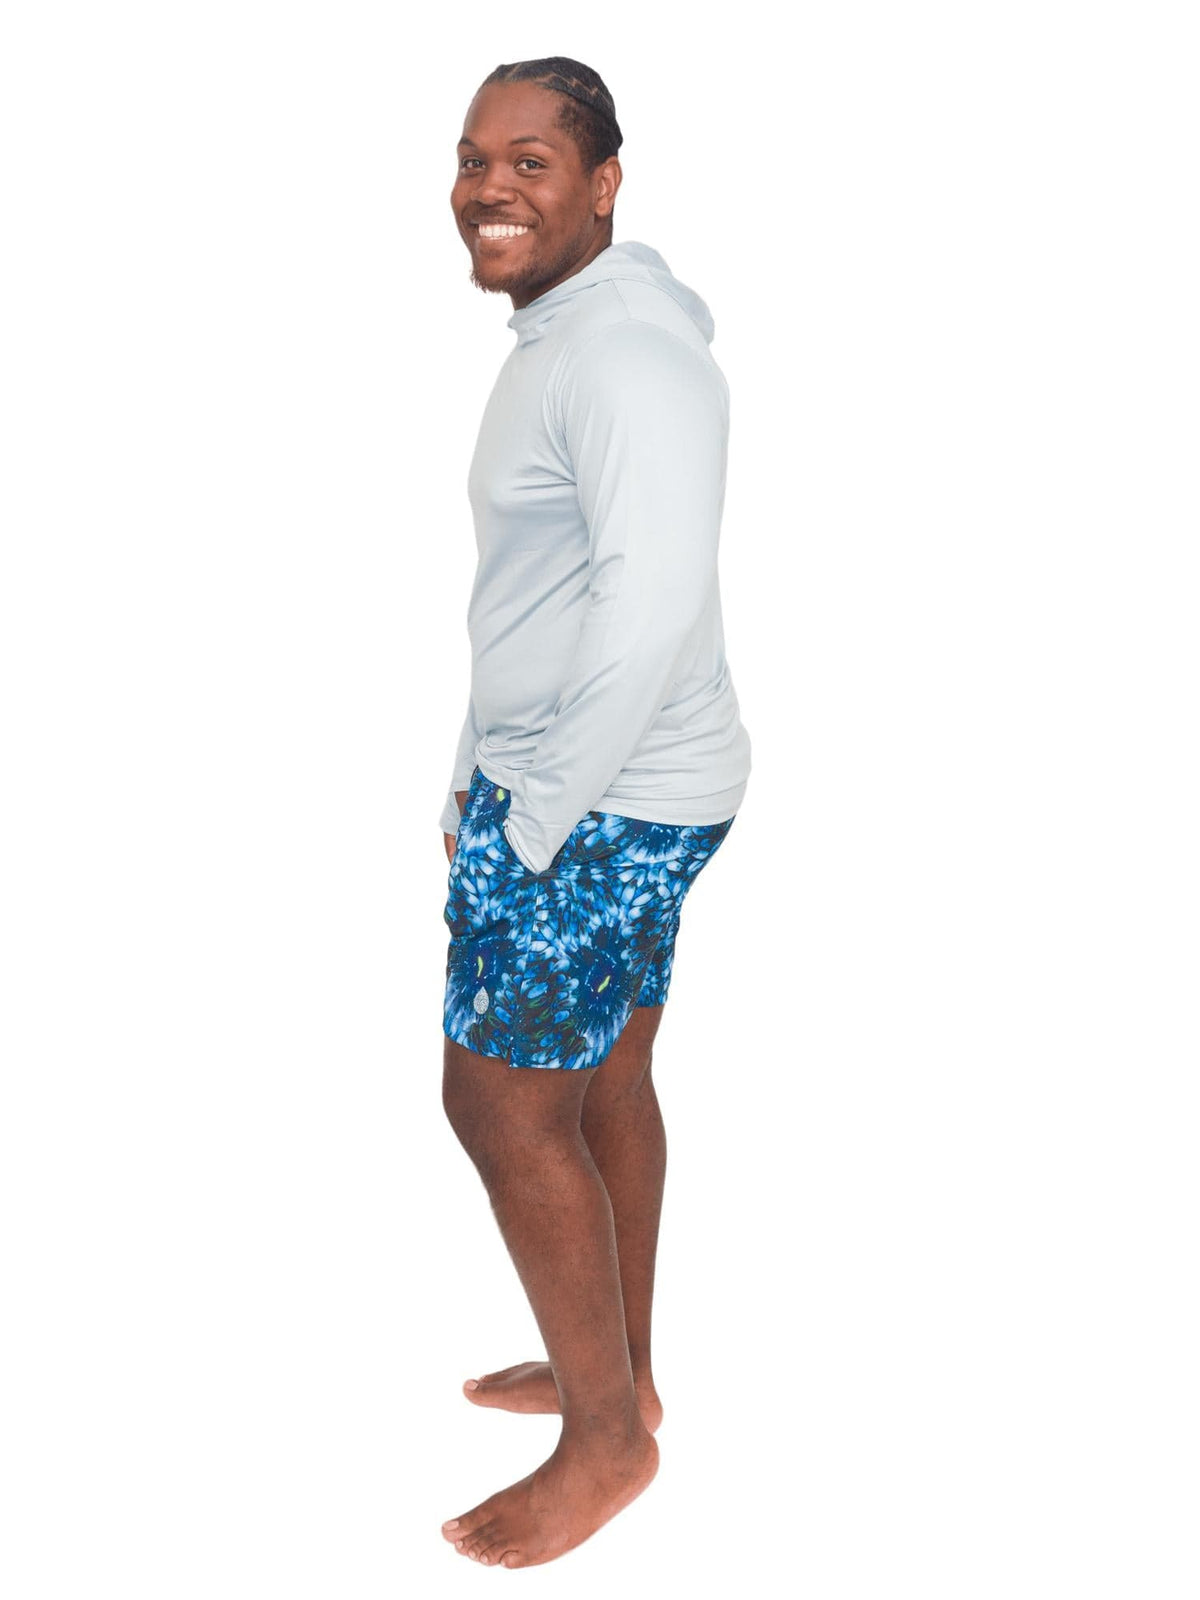 Model: Theo dedicates his free time to volunteering with local non-profits to remove debris from our waterways, and restoring habitats. He is 6&#39;2&quot;, 260lbs, and wearing a size 2XL Short and Sun Shirt.